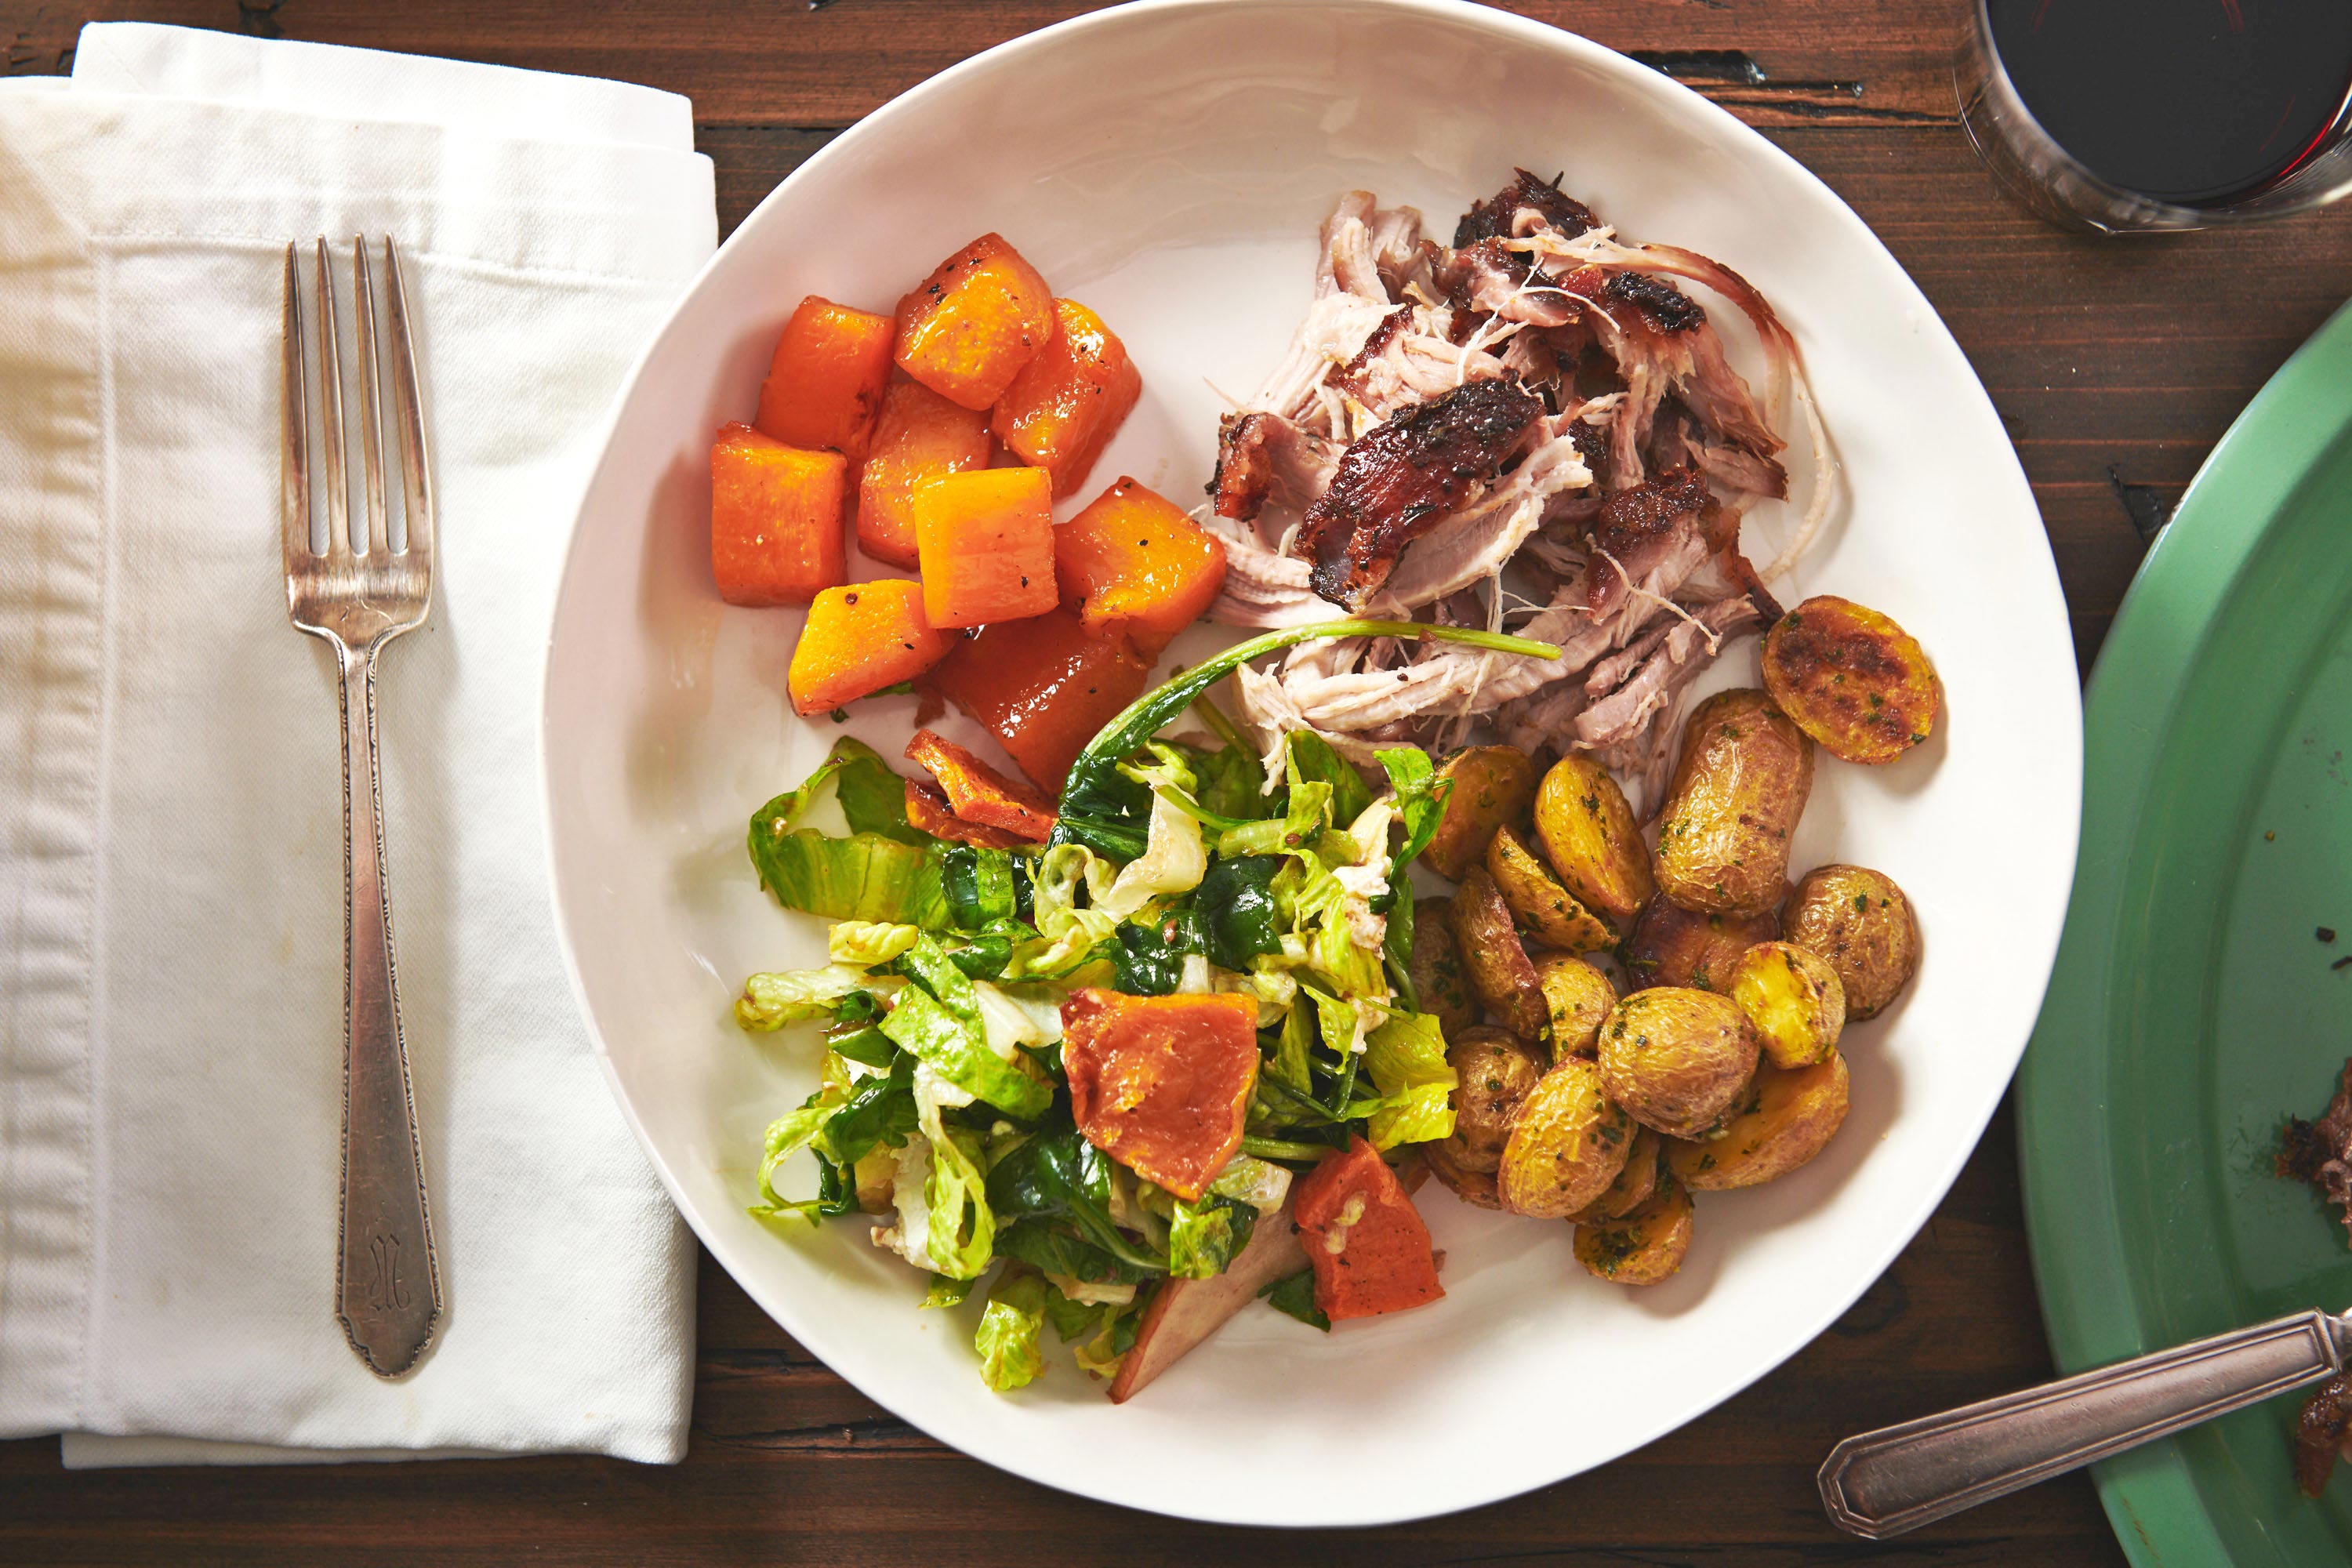 Roasted Butternut Squash on a plate with meat, potatoes, and salad.